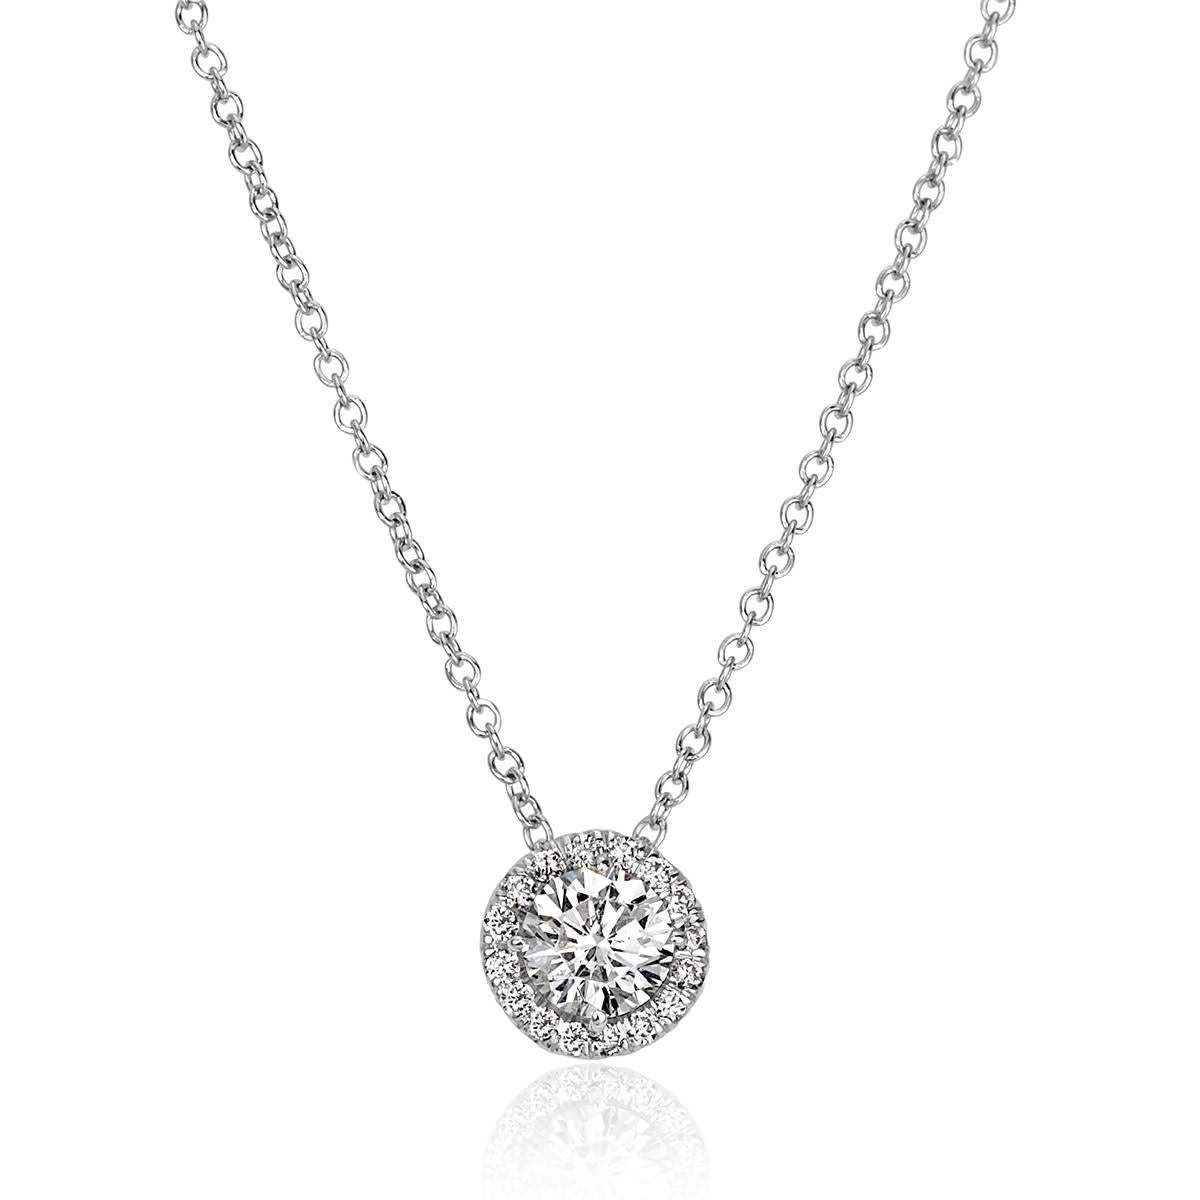 This exquisite diamond pendant features 0.47ct of round brilliant cut diamonds, with a larger round brilliant cut diamond set at the center surrounded by a shimmering halo of smaller round diamonds. The diamonds are graded at E-F in color, VS2-SI1